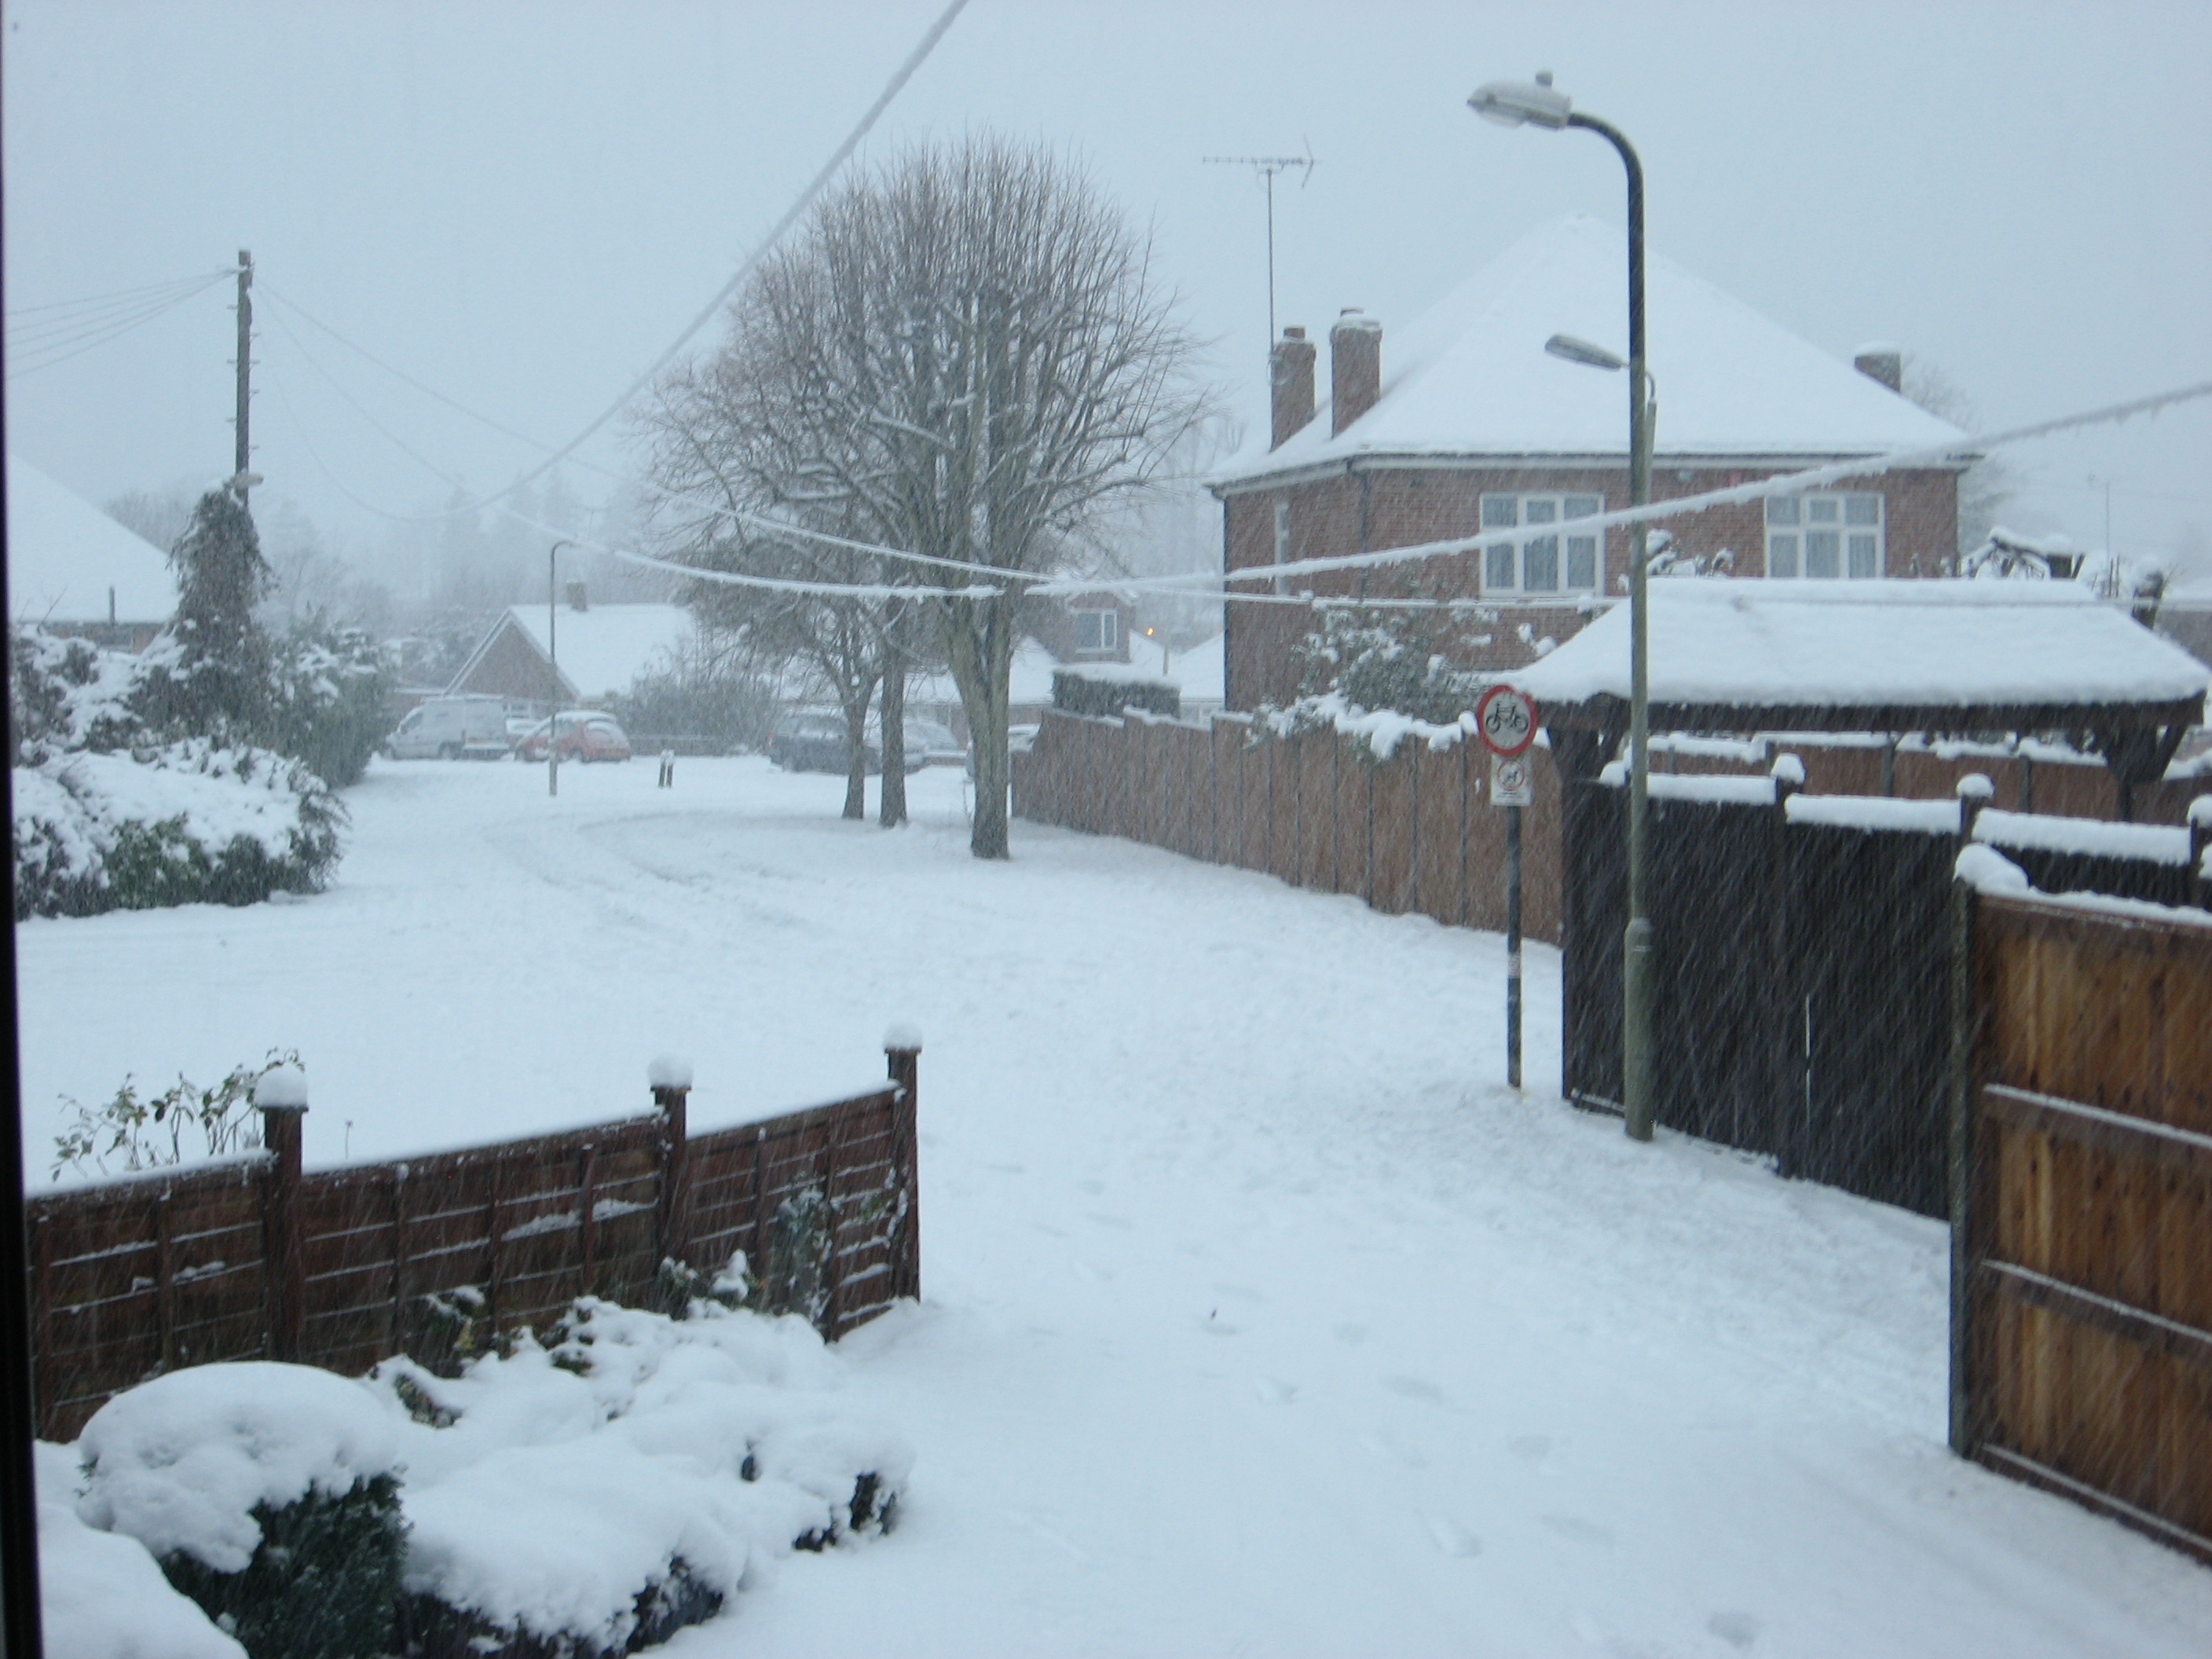 One of the rare occasions when there was notable snow in our road, January 2010.  Well, it seemed vaguely festive!